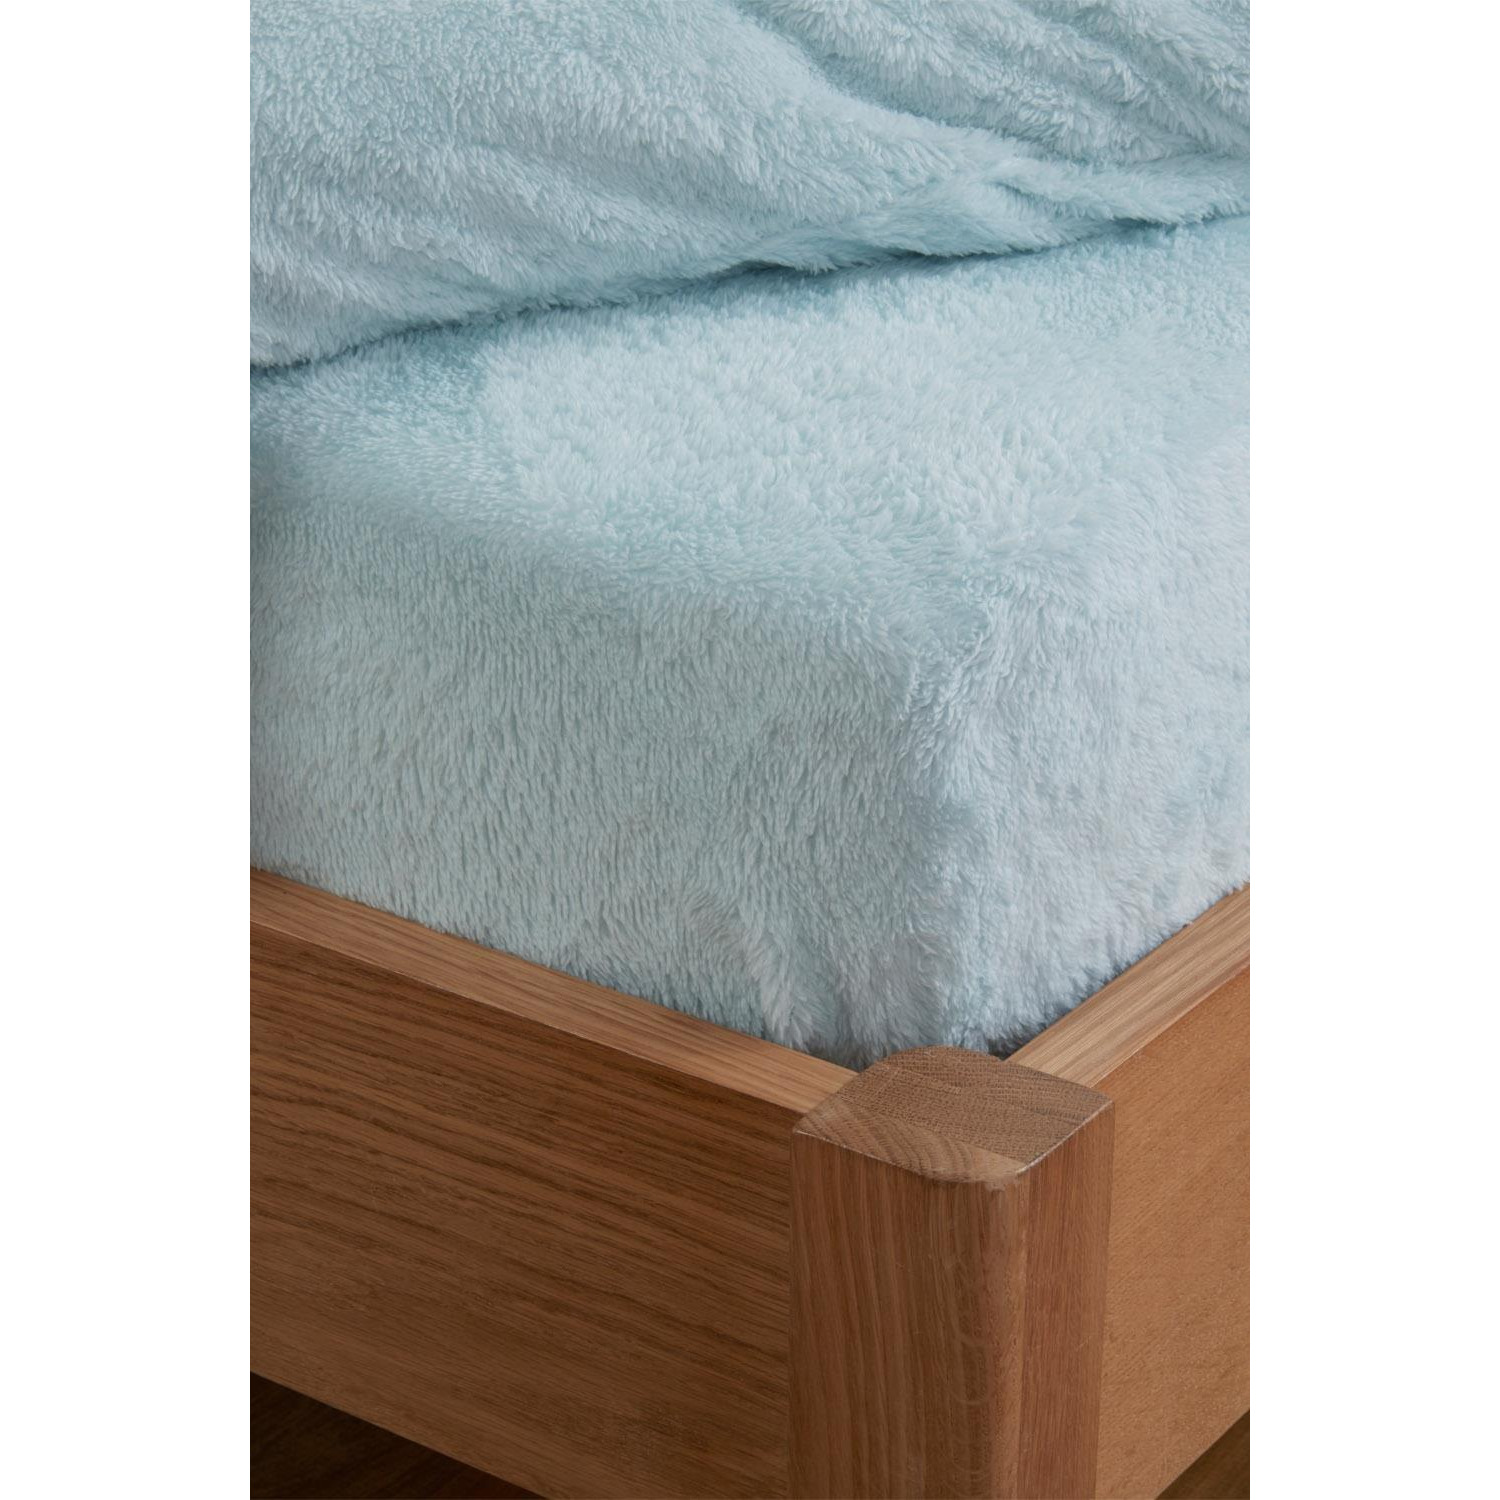 Teddy Fleece Thermal Fitted Bed Sheet